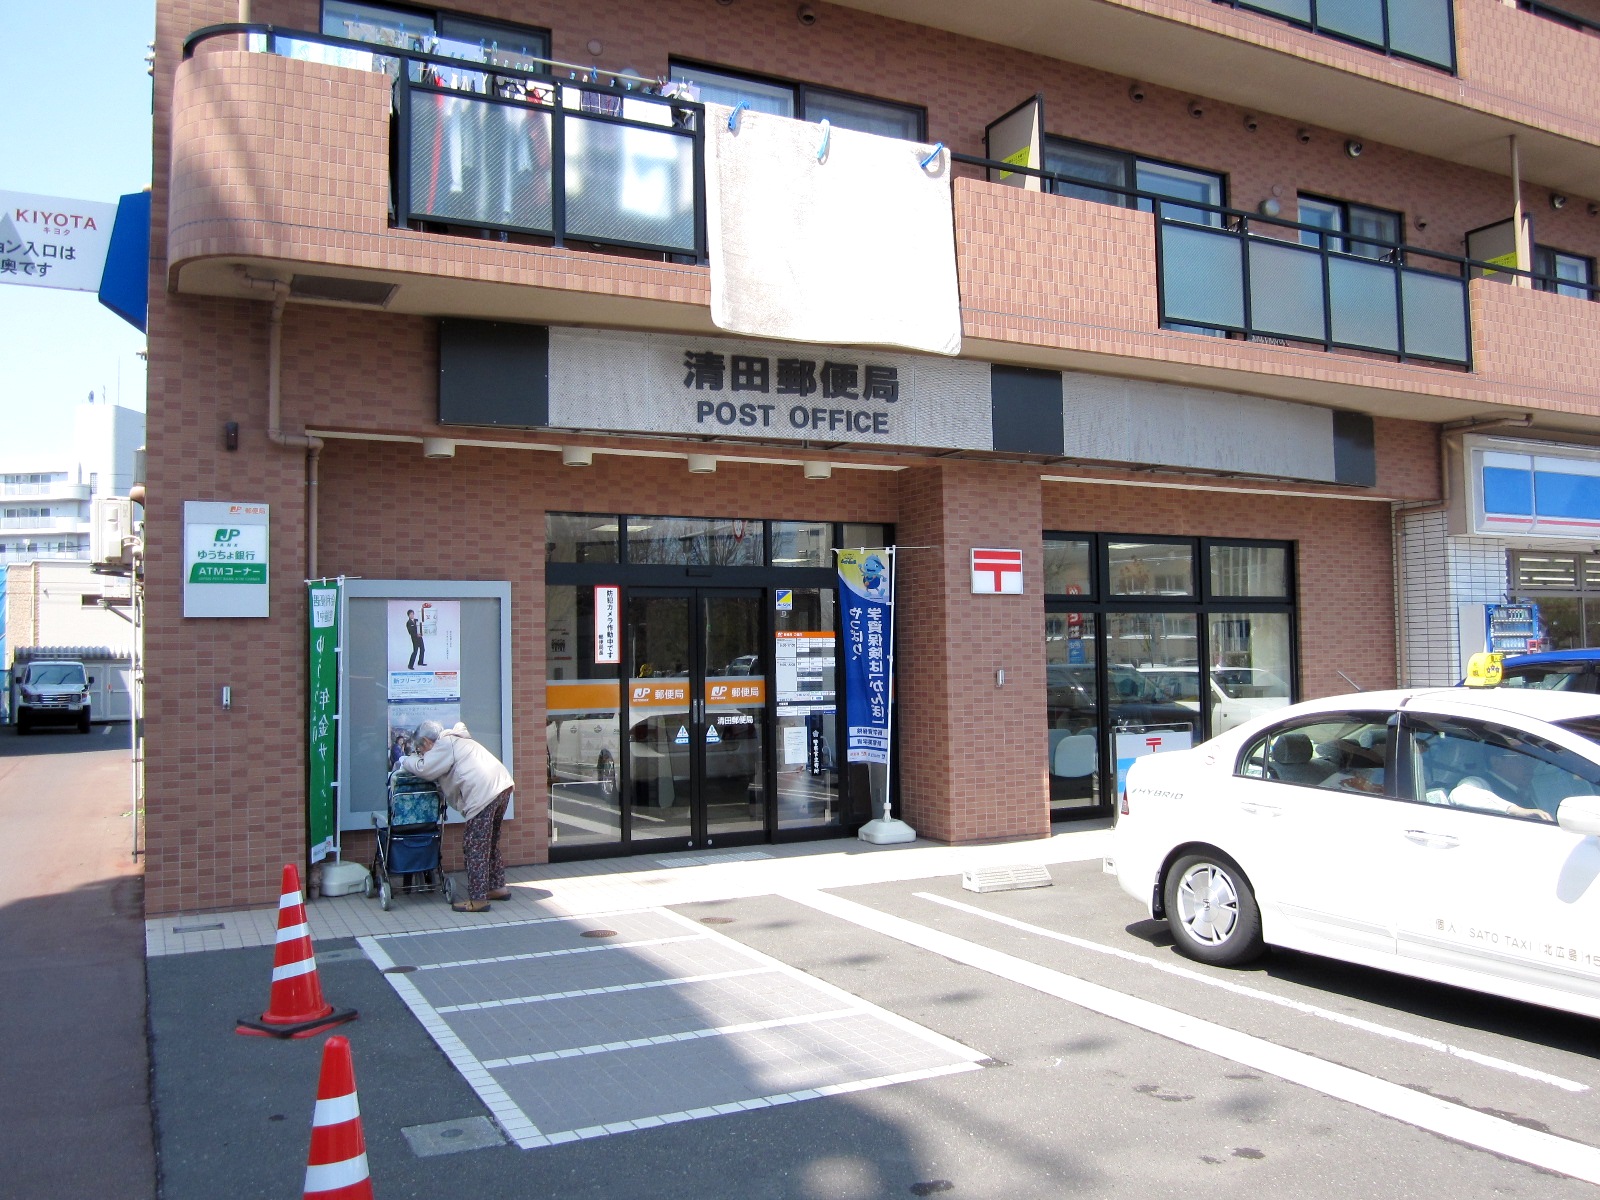 post office. Kiyota 919m until the post office (post office)